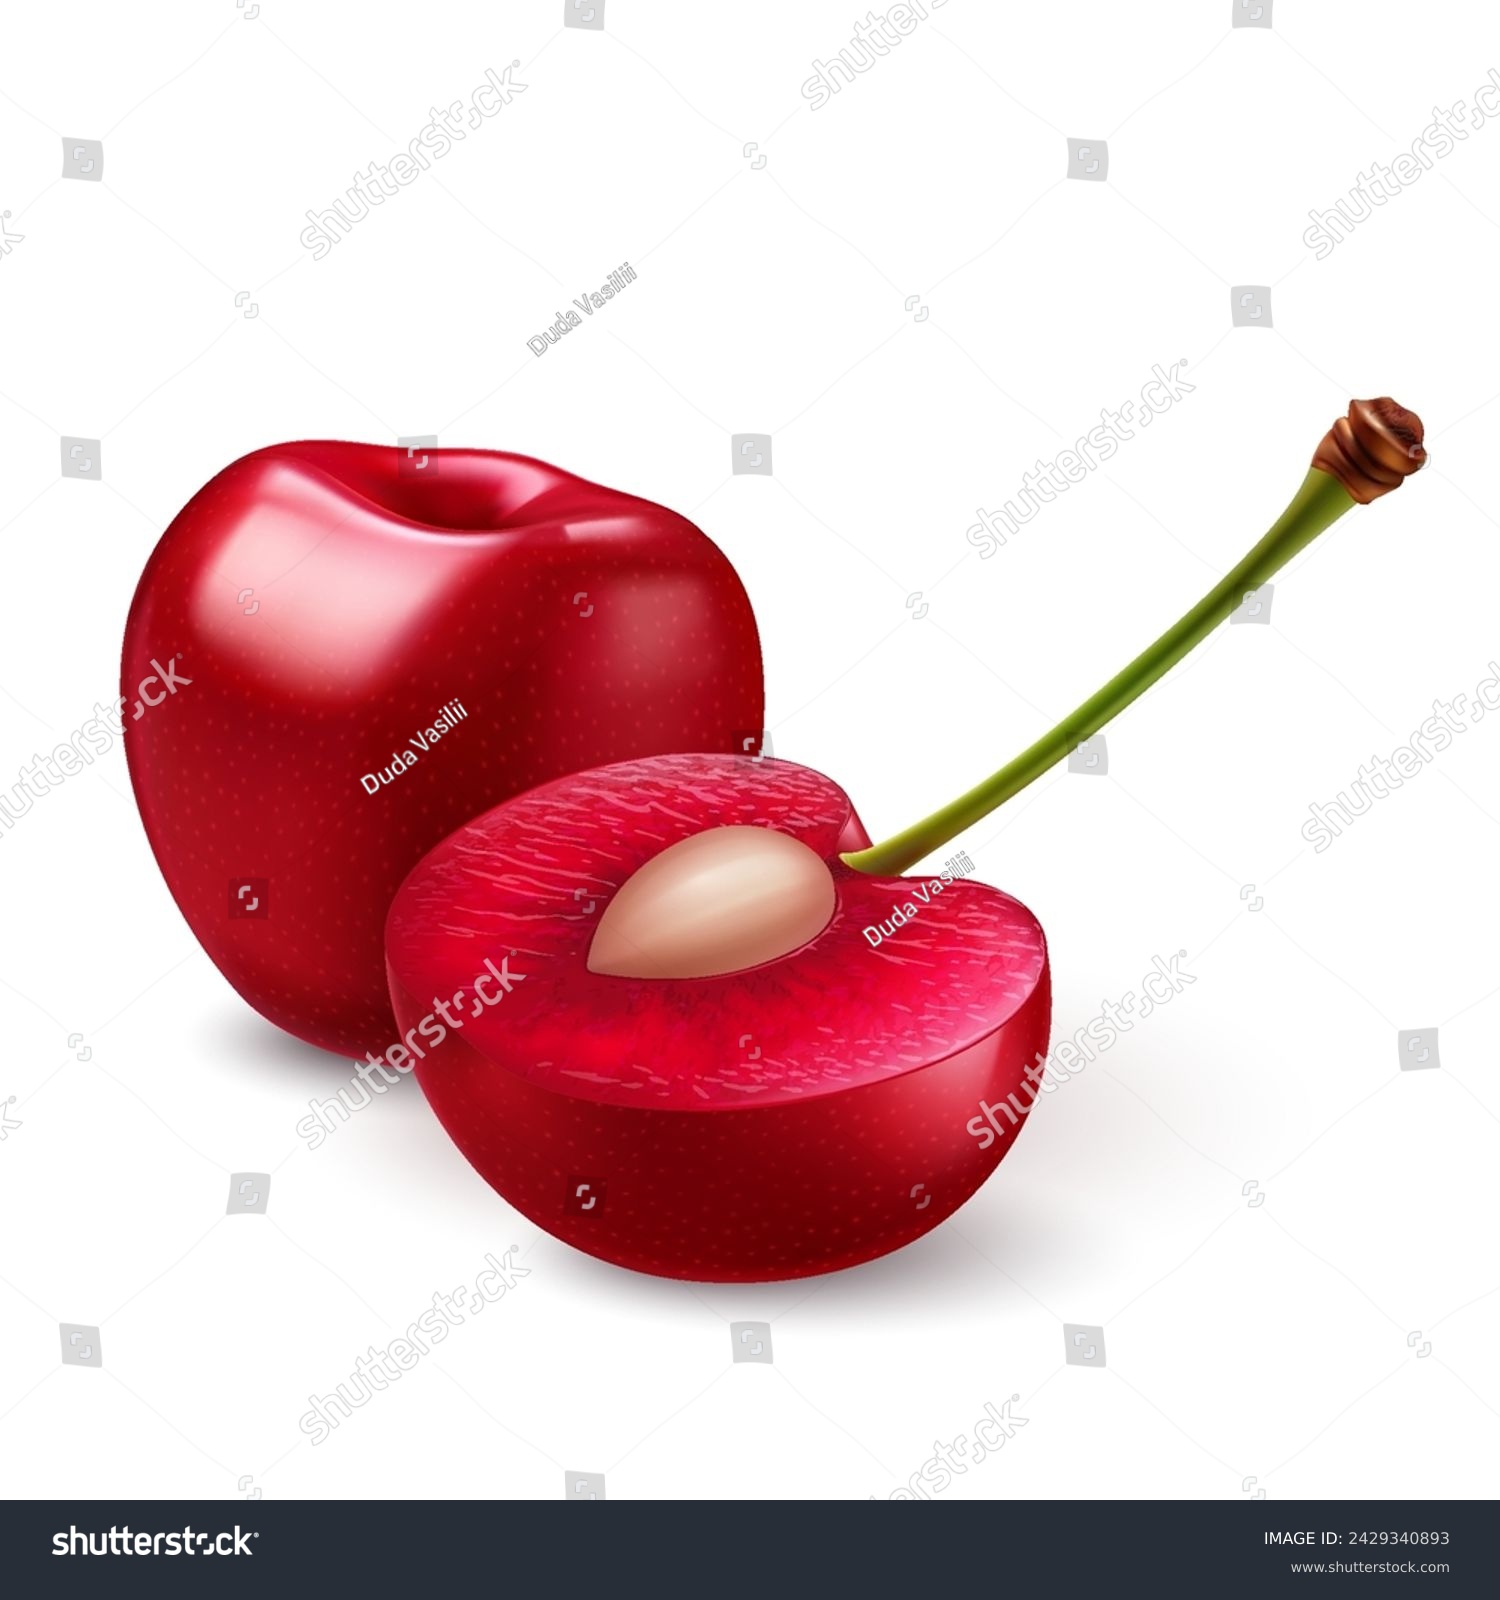 Illustration of smooth-skinned, ripe red sweet cherries, juicy light red flesh, and small pits, on a white backdrop #2429340893